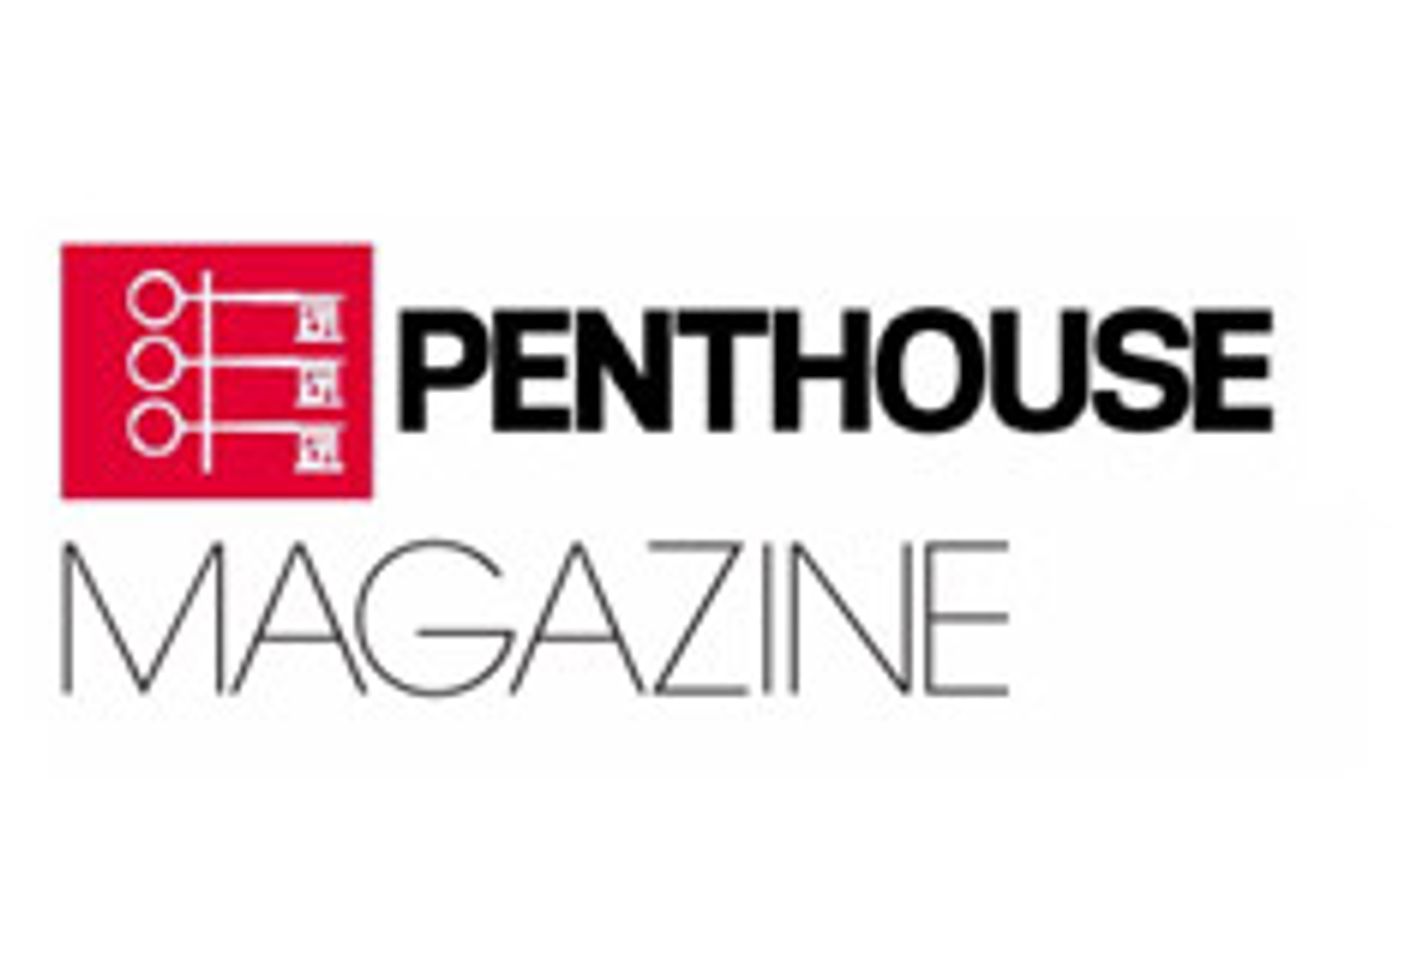 Iggy Pop, Valentine Ideas in New Issue of <i>Penthouse</i>